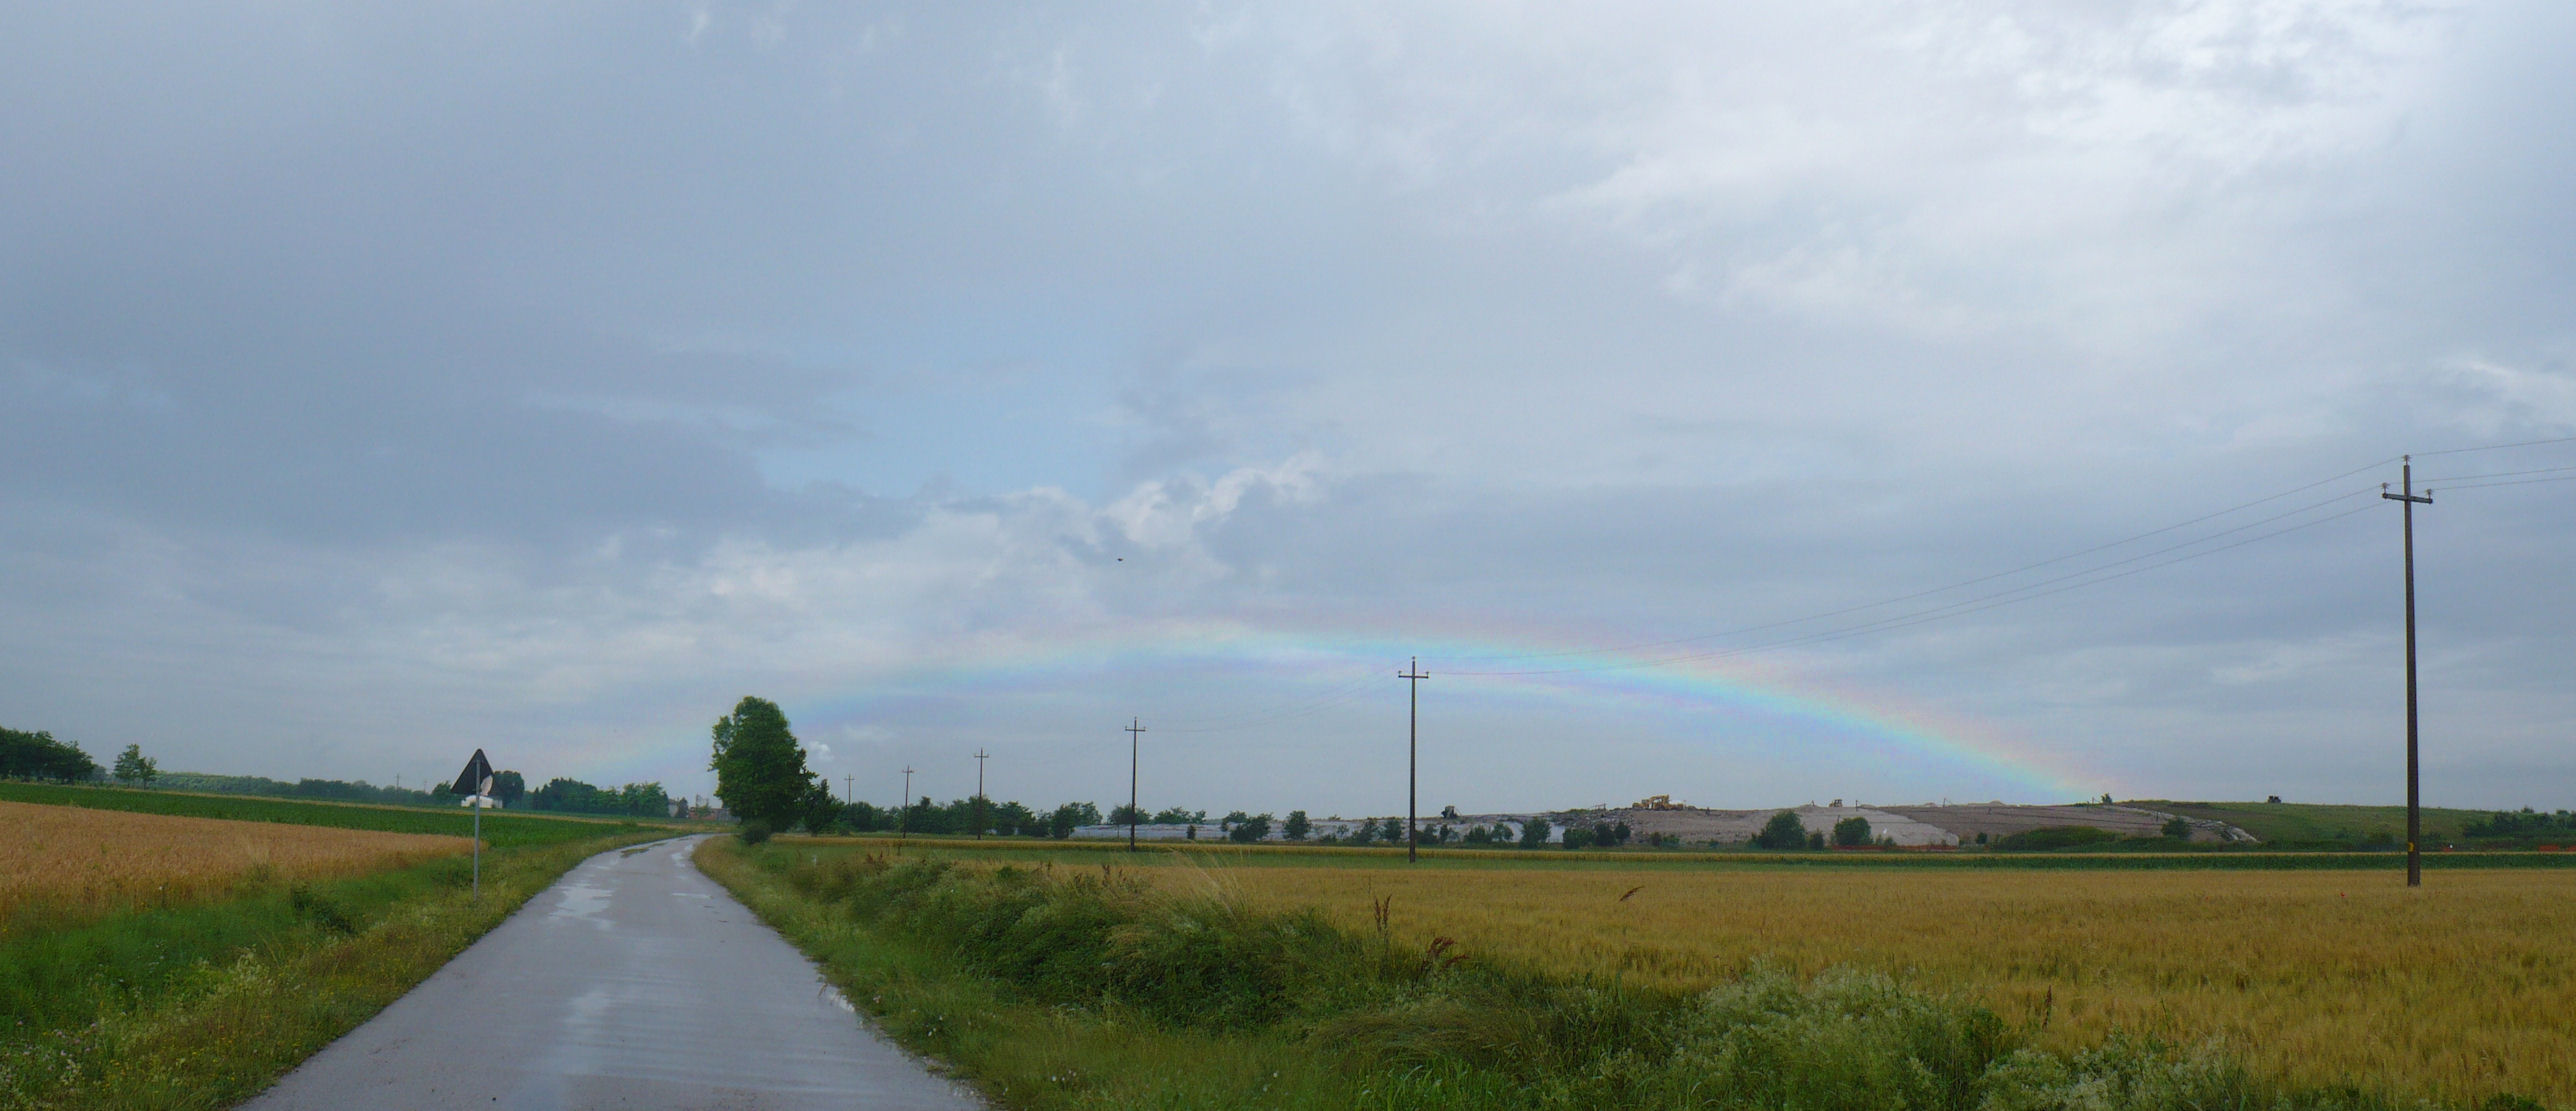 Particular rainbow over Trivignano Udinese: 304 KB; click on the image to enlarge